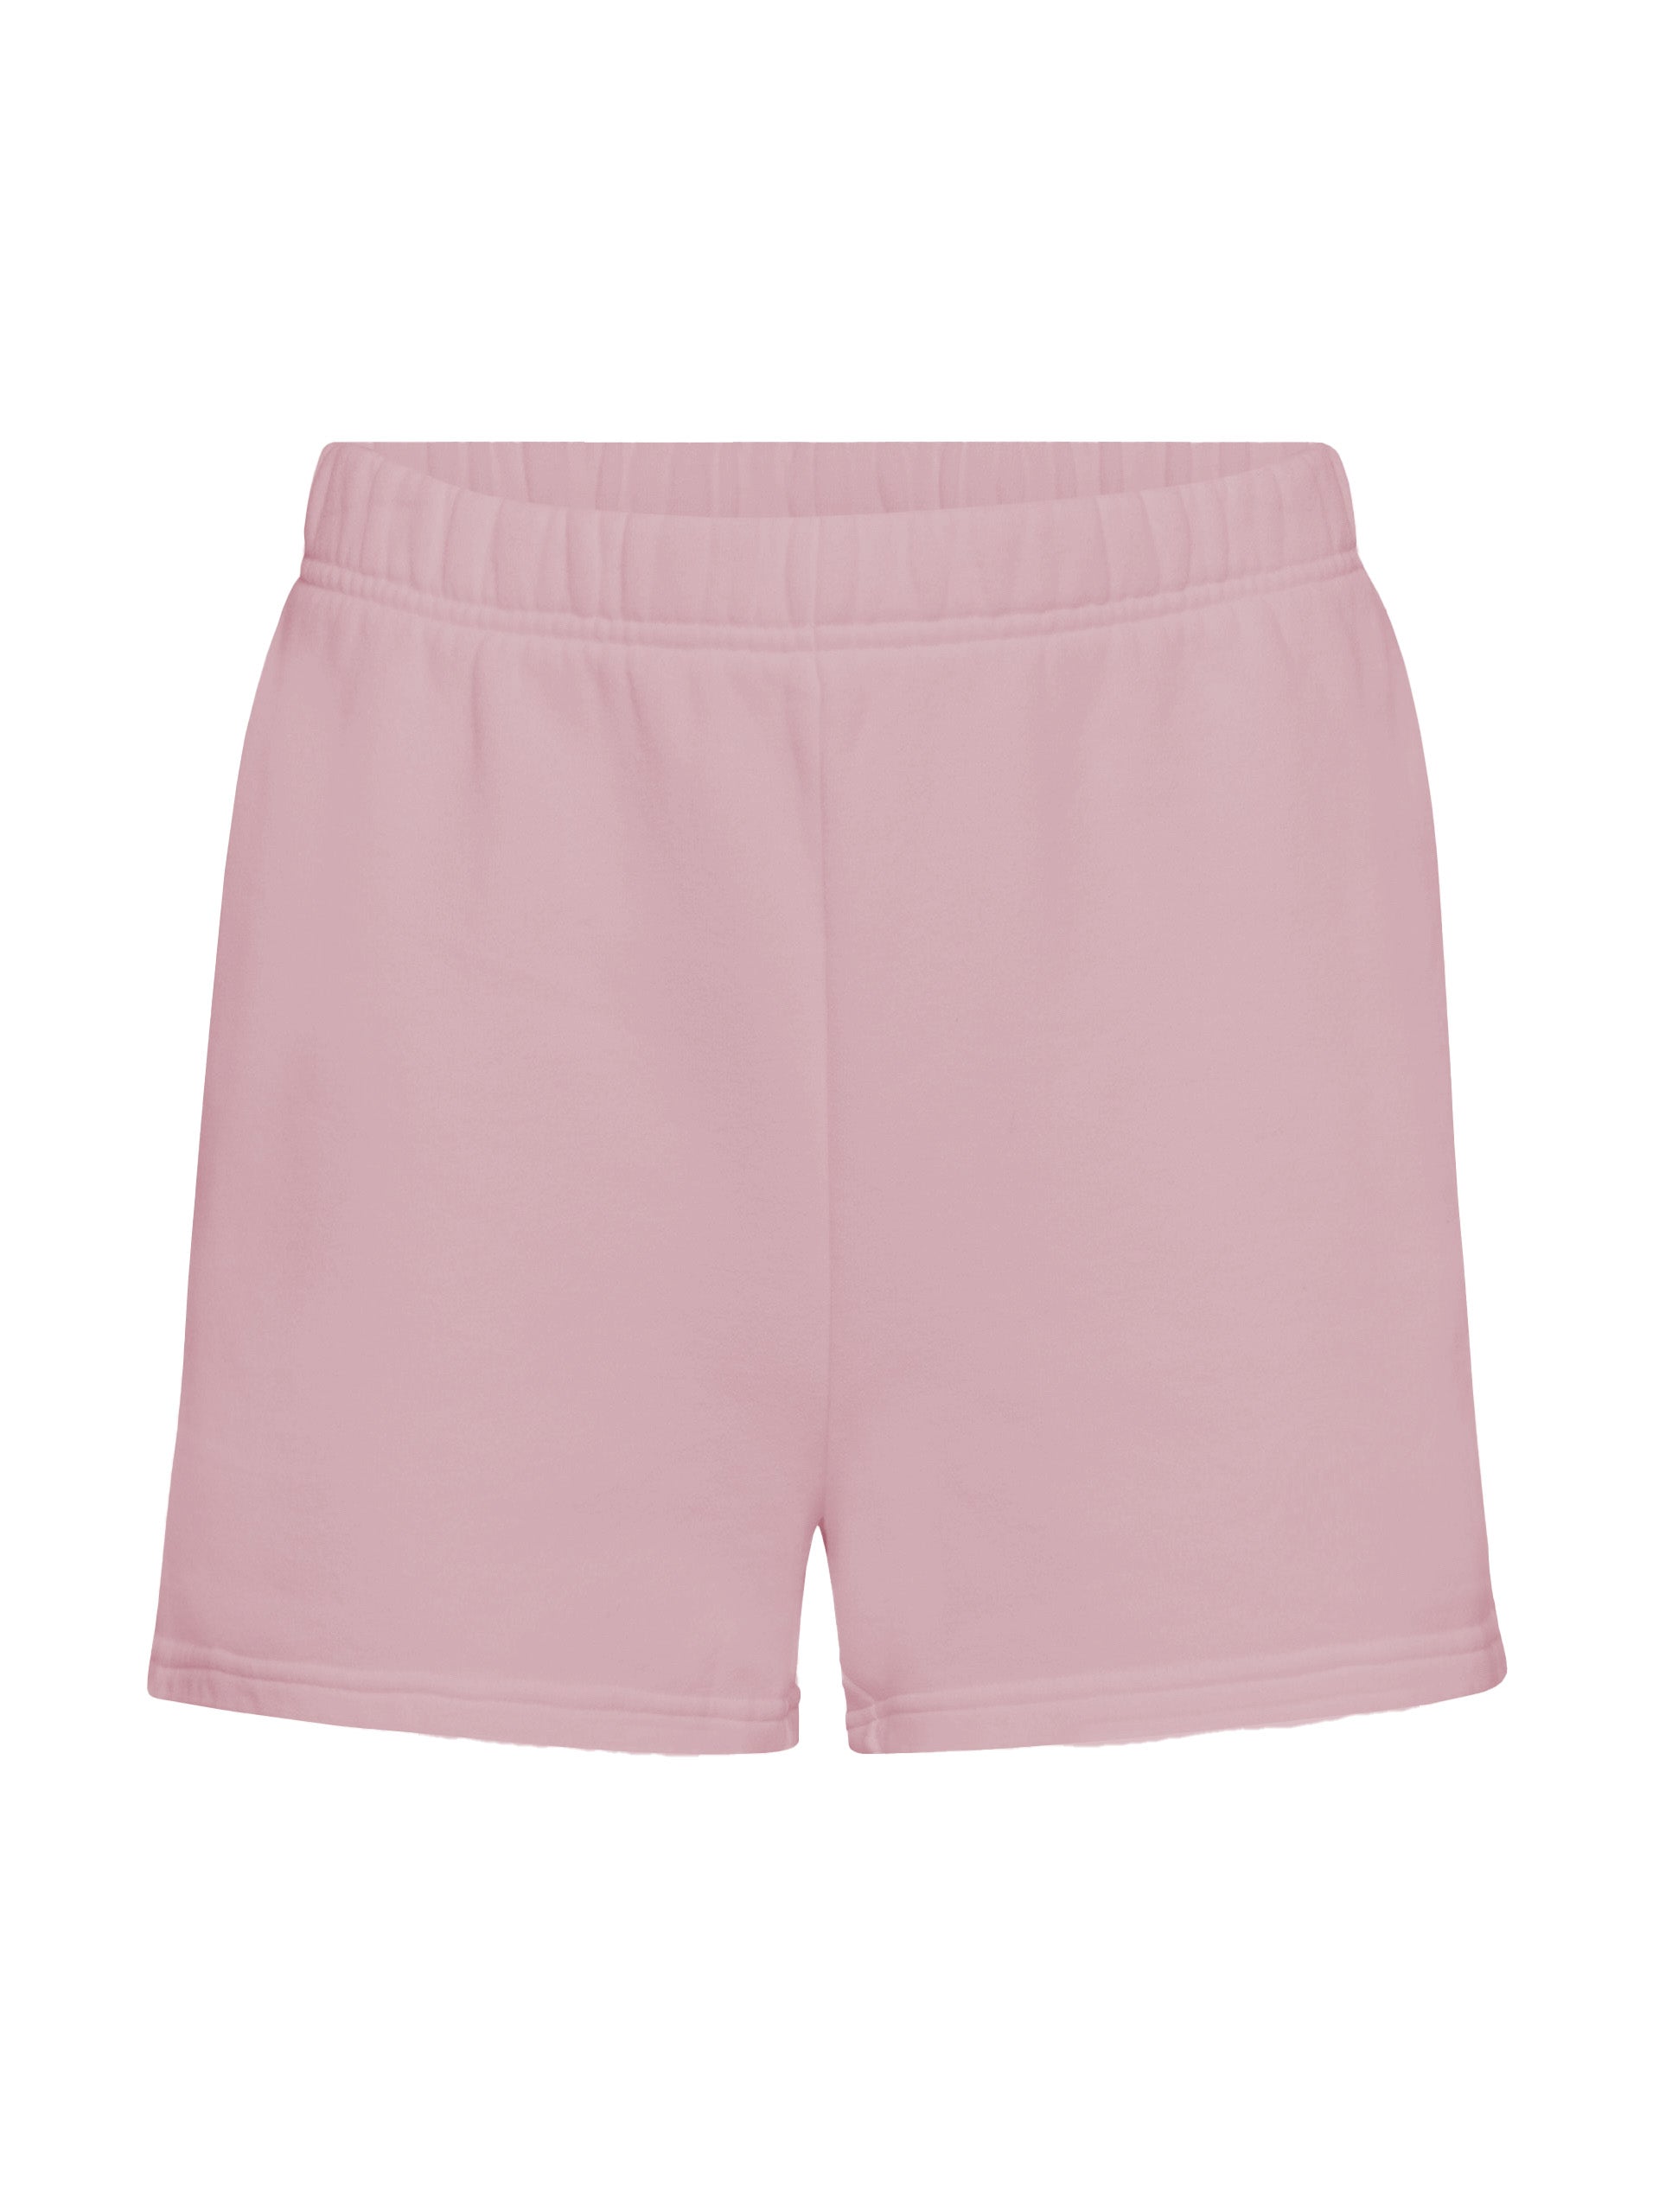 The Cozy Short - Blush Pink